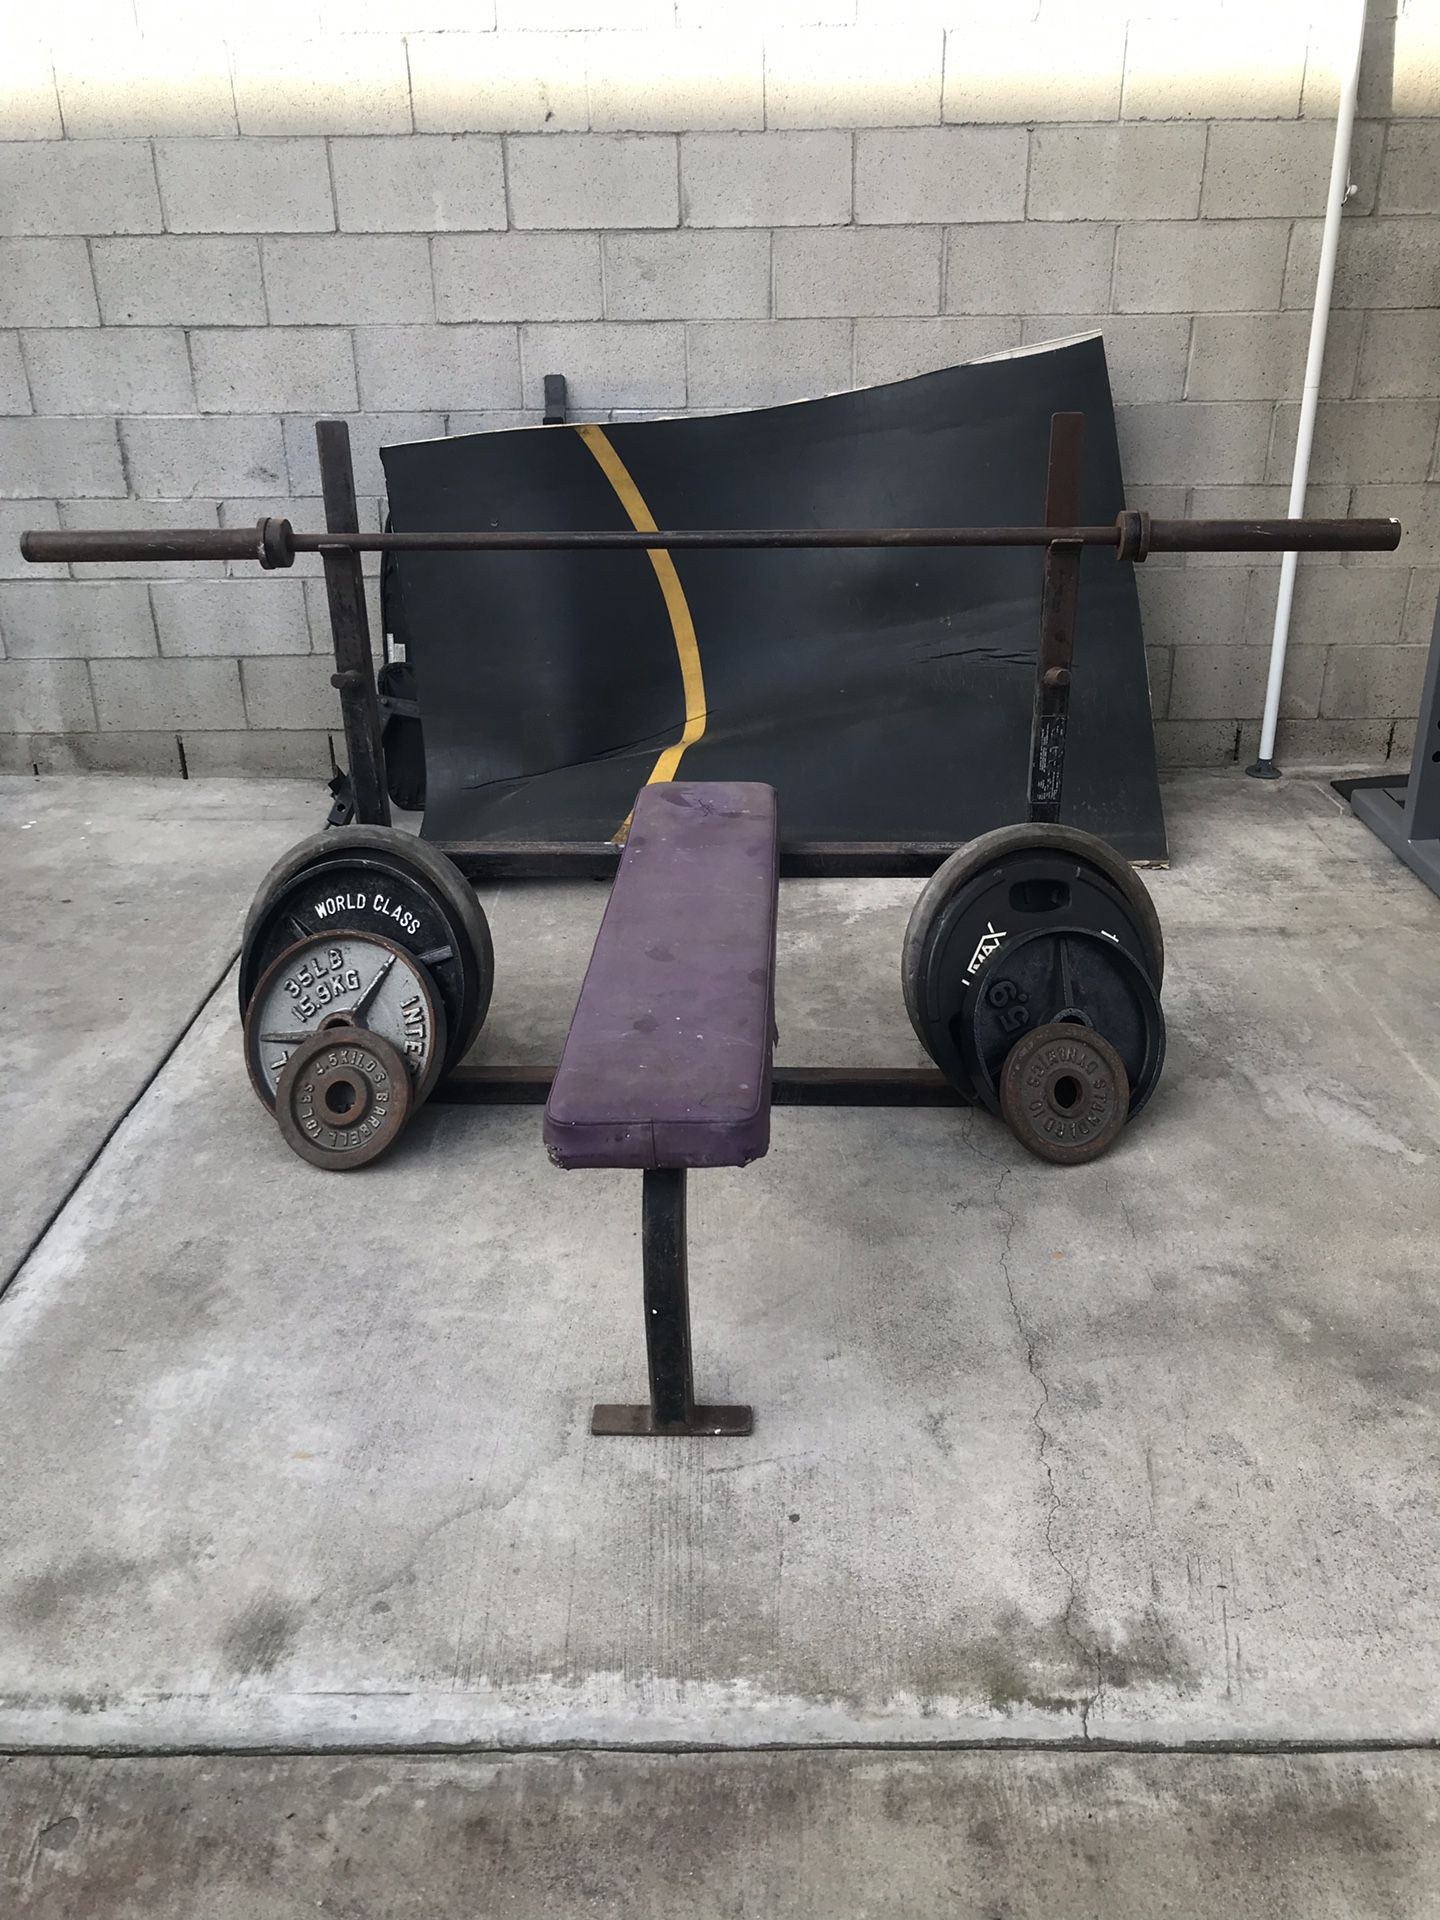 Olympic Bench press weight set.